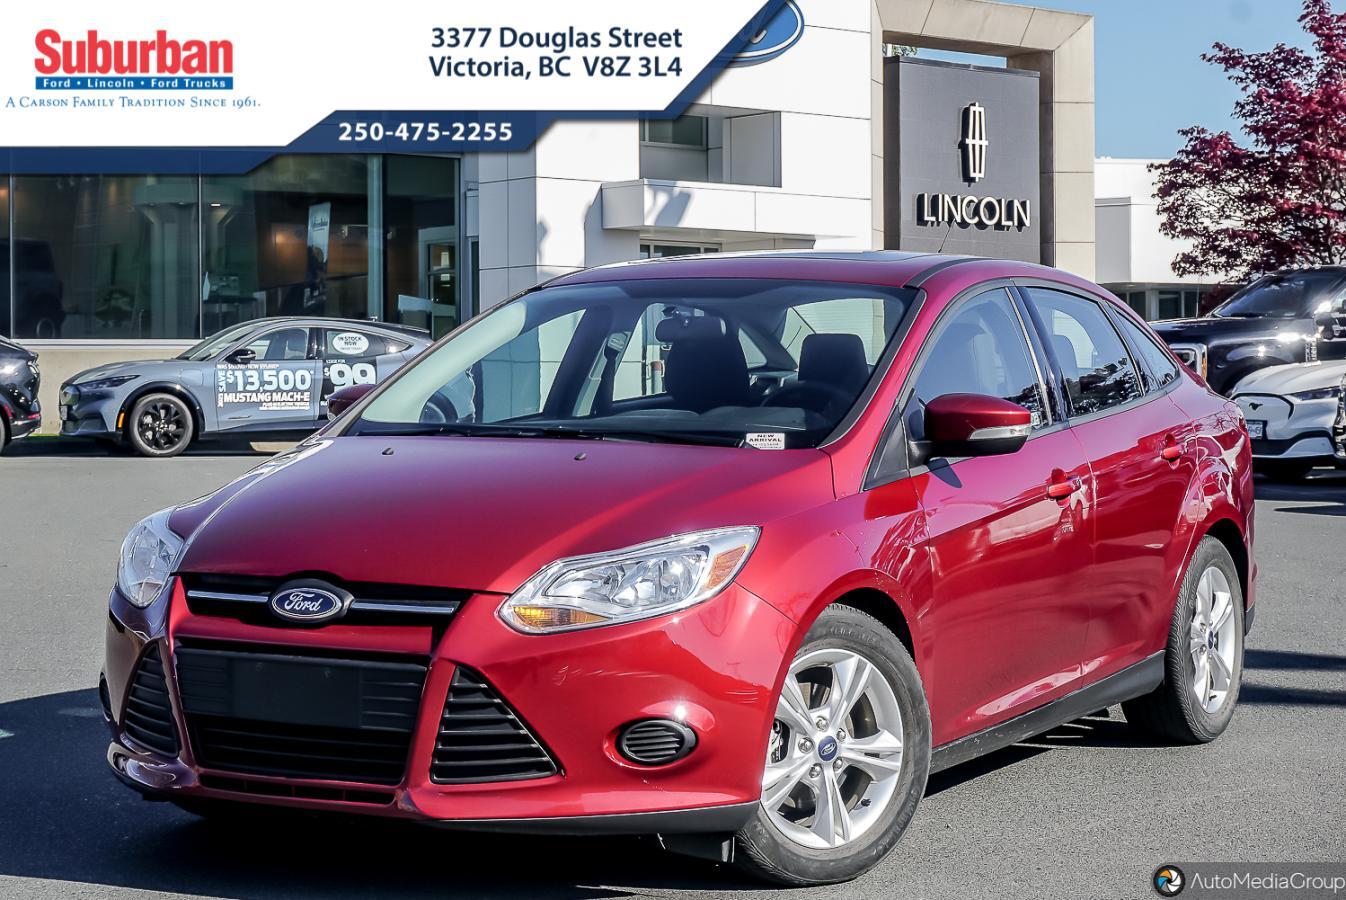 2014 Ford Focus SE | Sunroof | Heated Seats | Power Mirrors | Wint